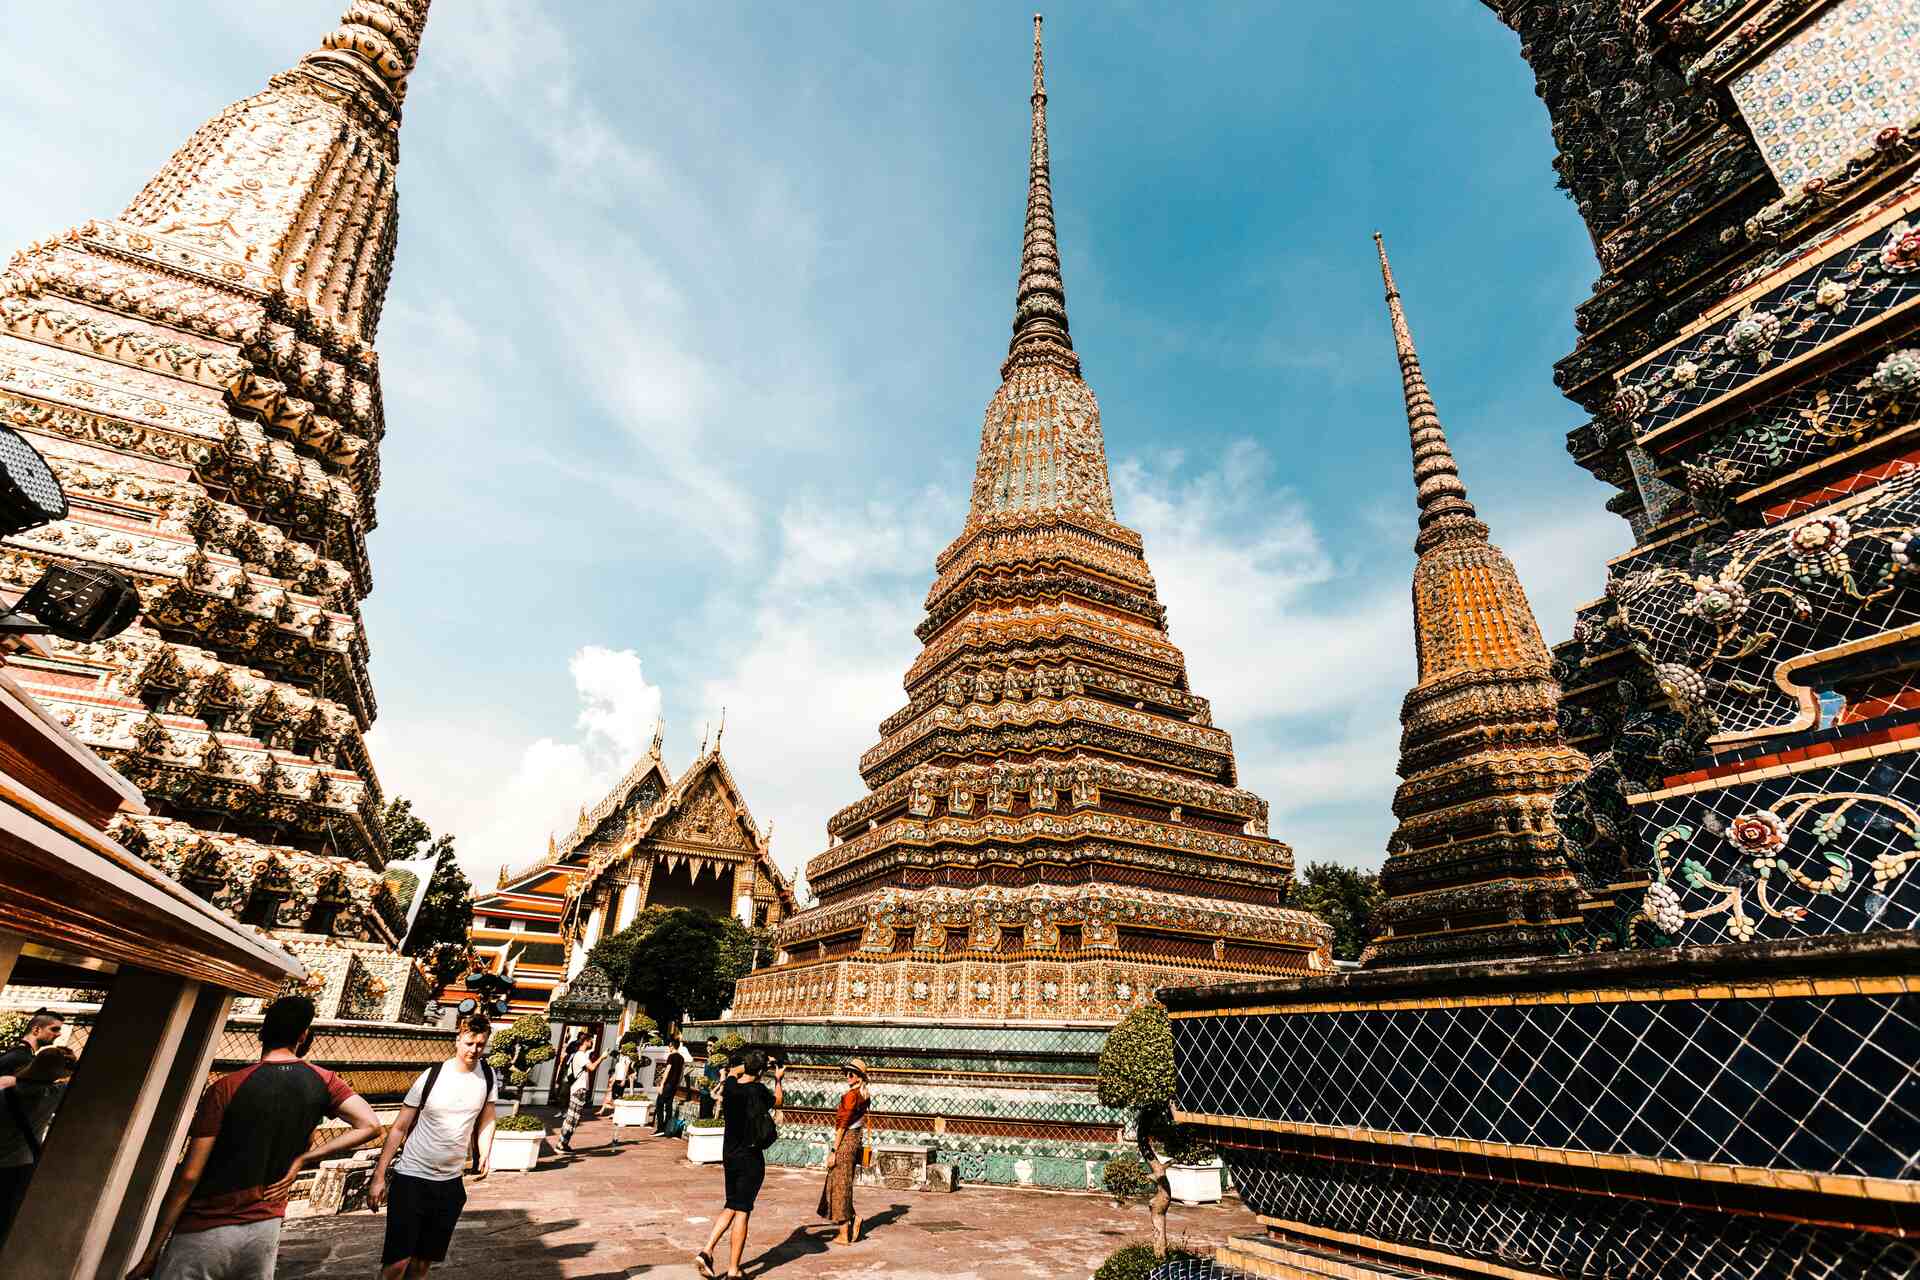 Thailand's pagodas by day